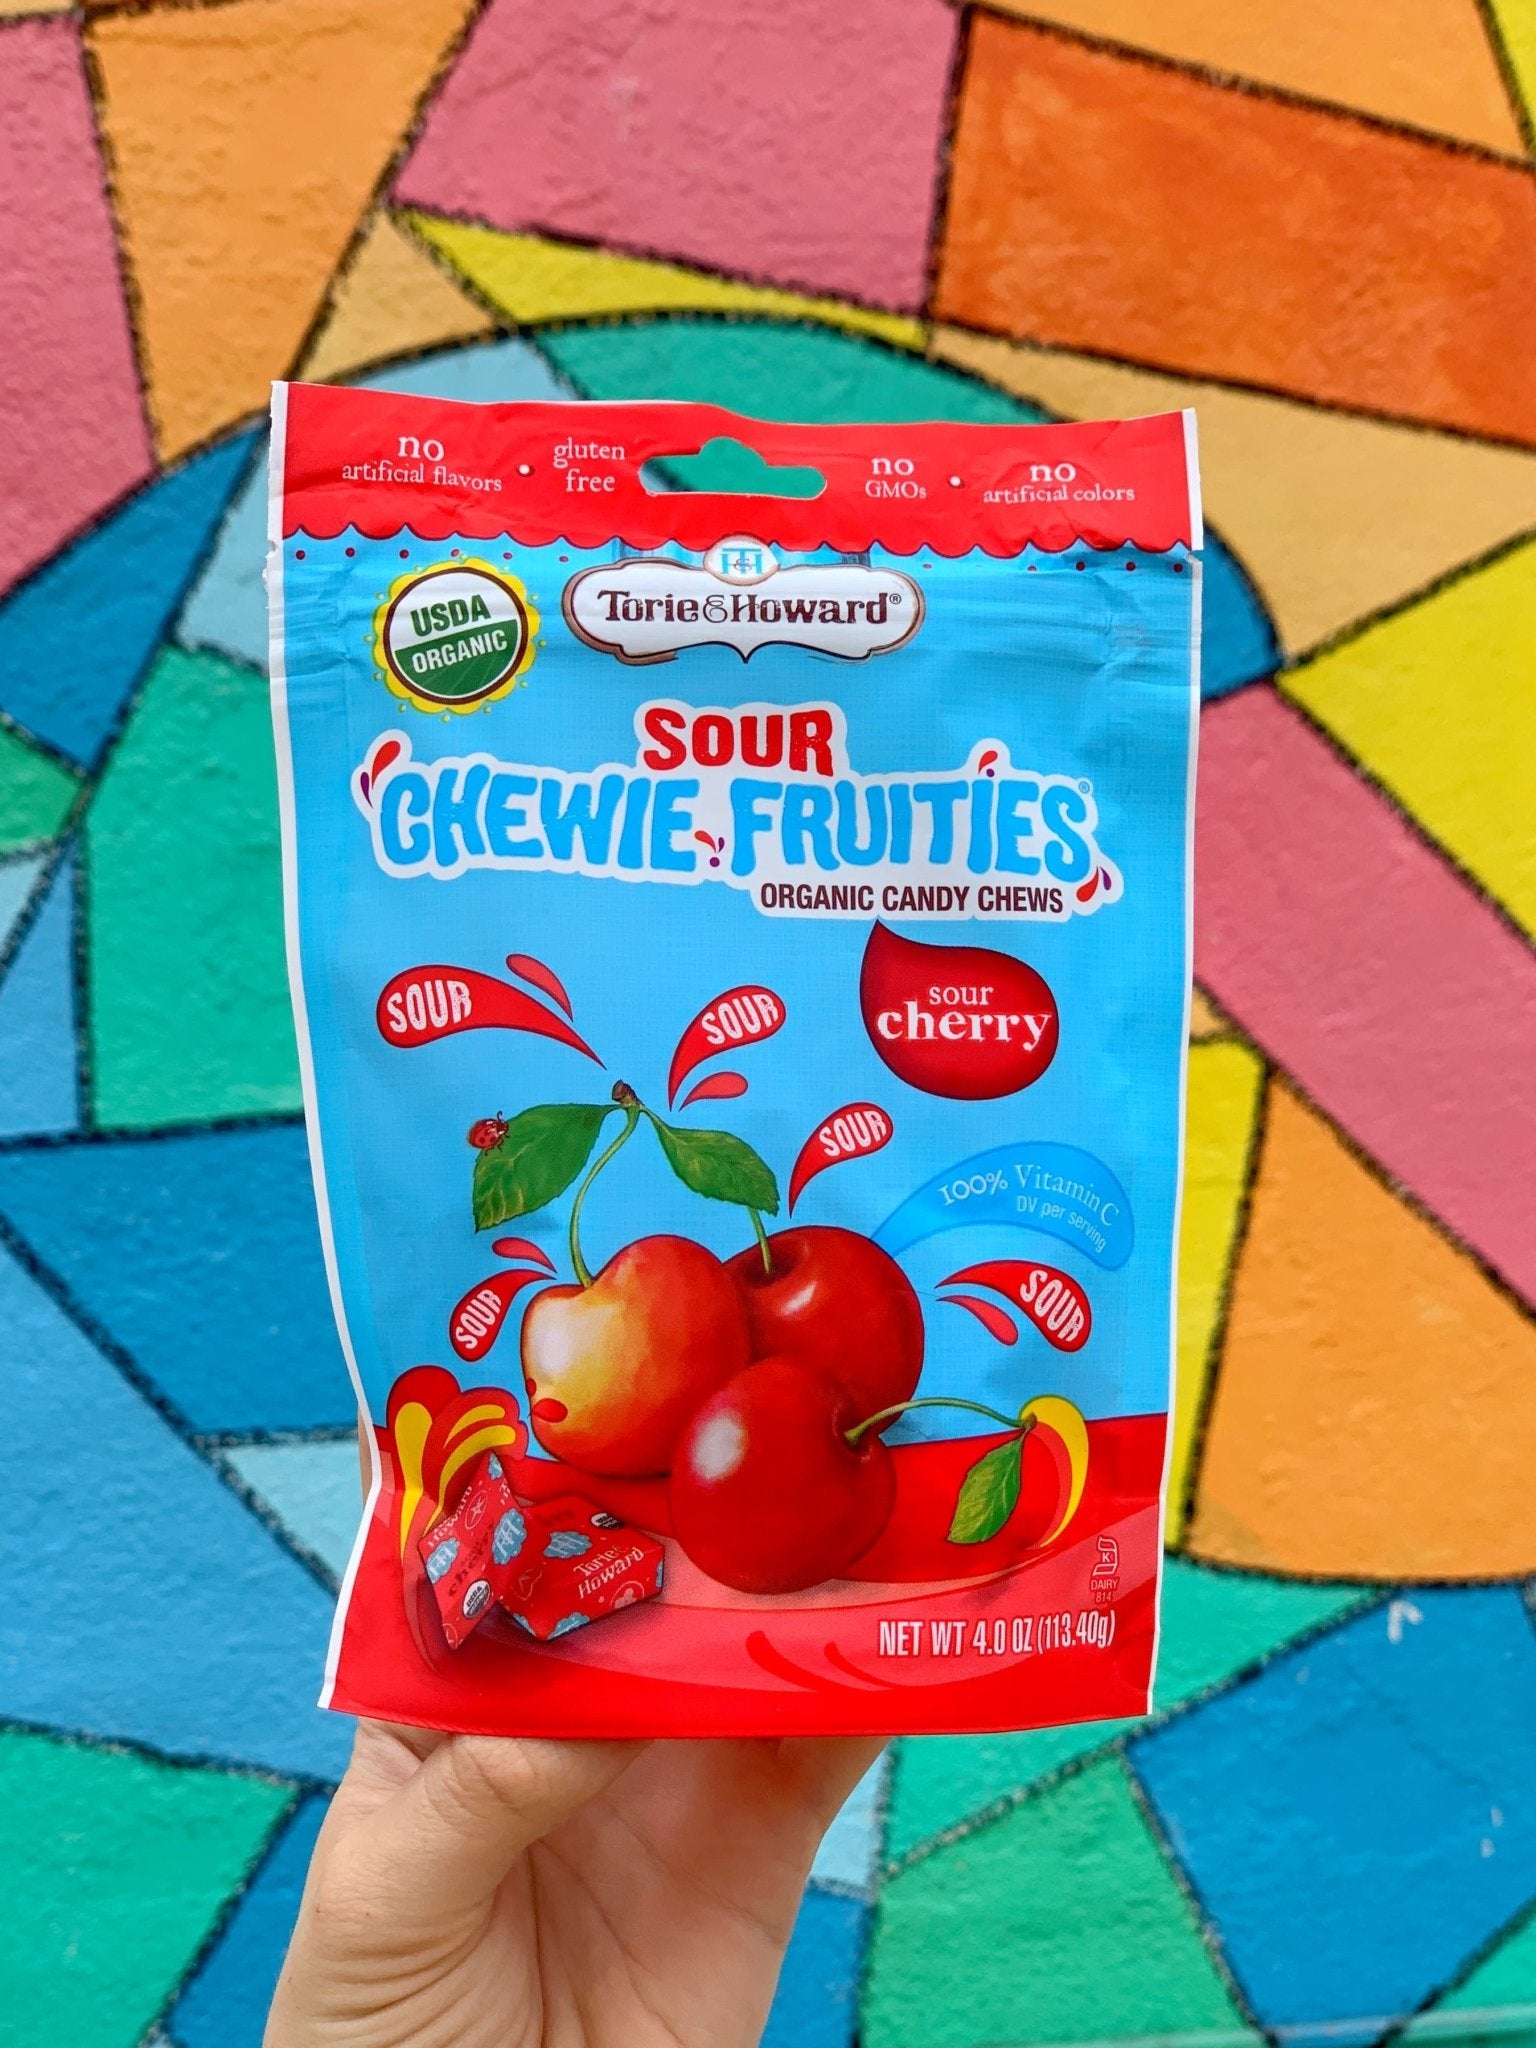 Torie & Howard Chewie Fruities Sour Cherry Candy, 4oz Bag in front of a colorful mosaic background